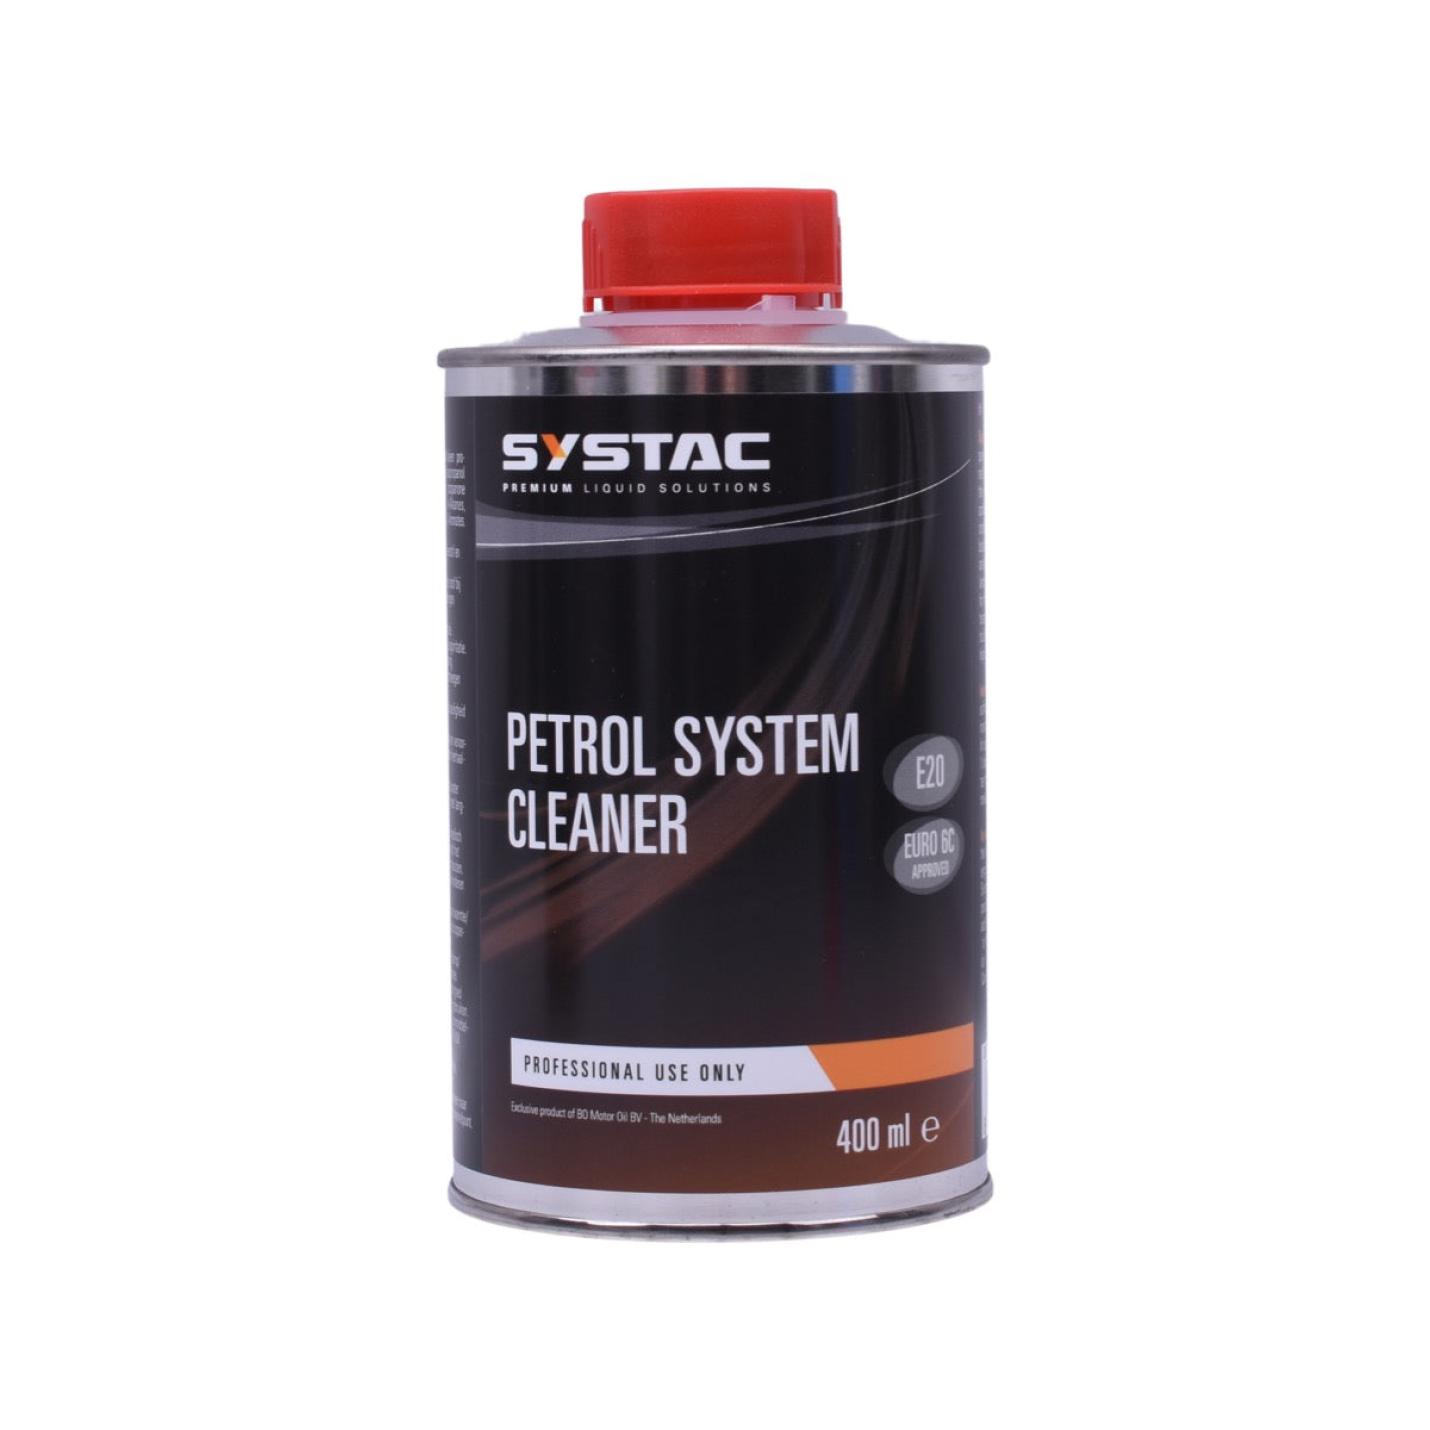 Brandstofadditief Systac Petrol System Cleaner (400ml) AE-trading